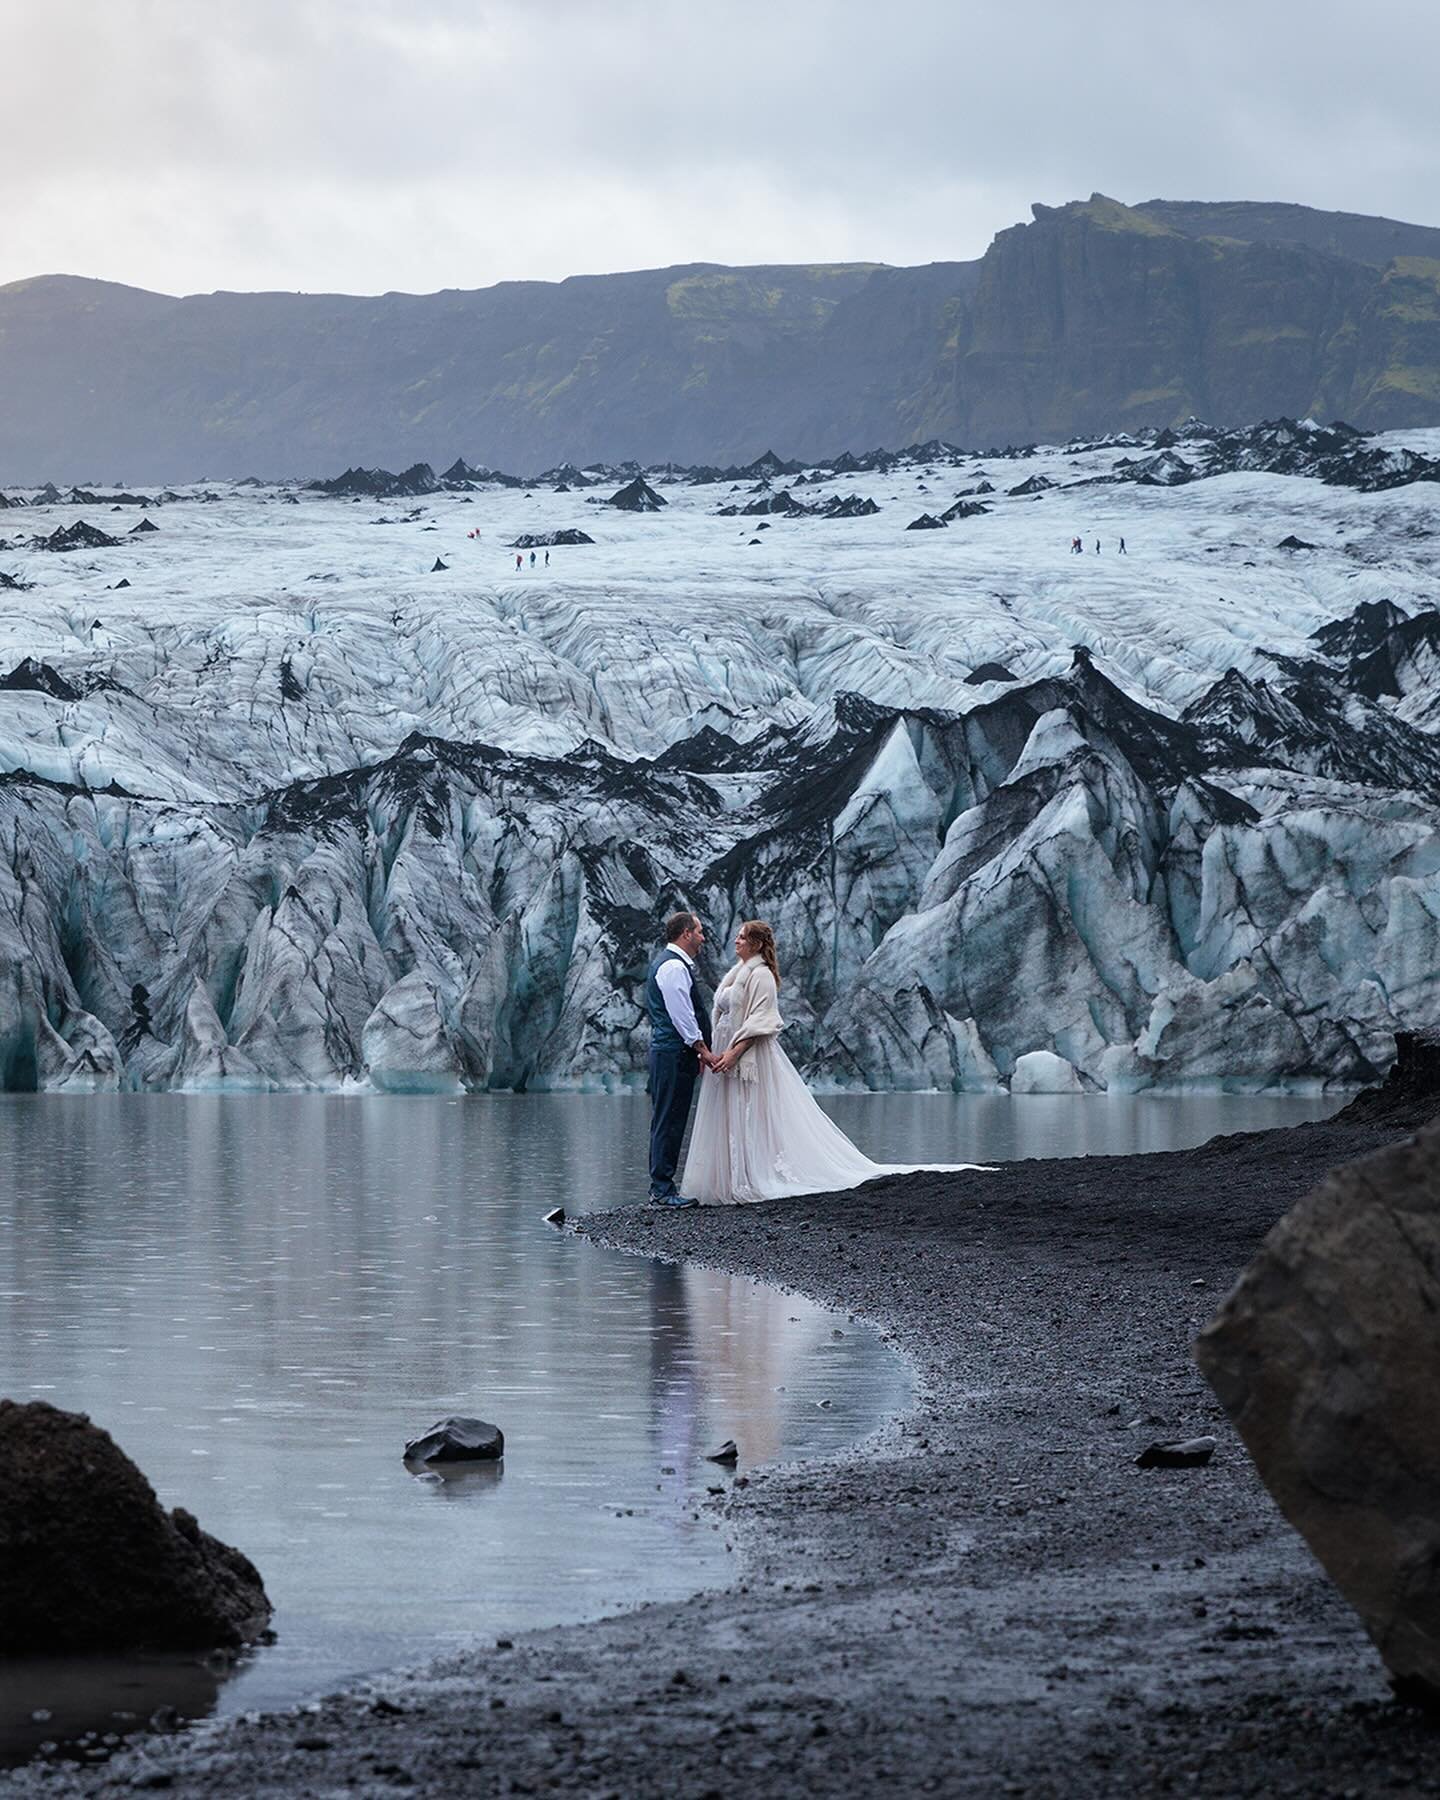 &ldquo;Love is deaf. You can&rsquo;t just tell someone you love them. You have to show it.&rdquo; This couple is a great example of this inspirational quote. As we photographed their wedding in Iceland, we could easily see how much they cared for eac